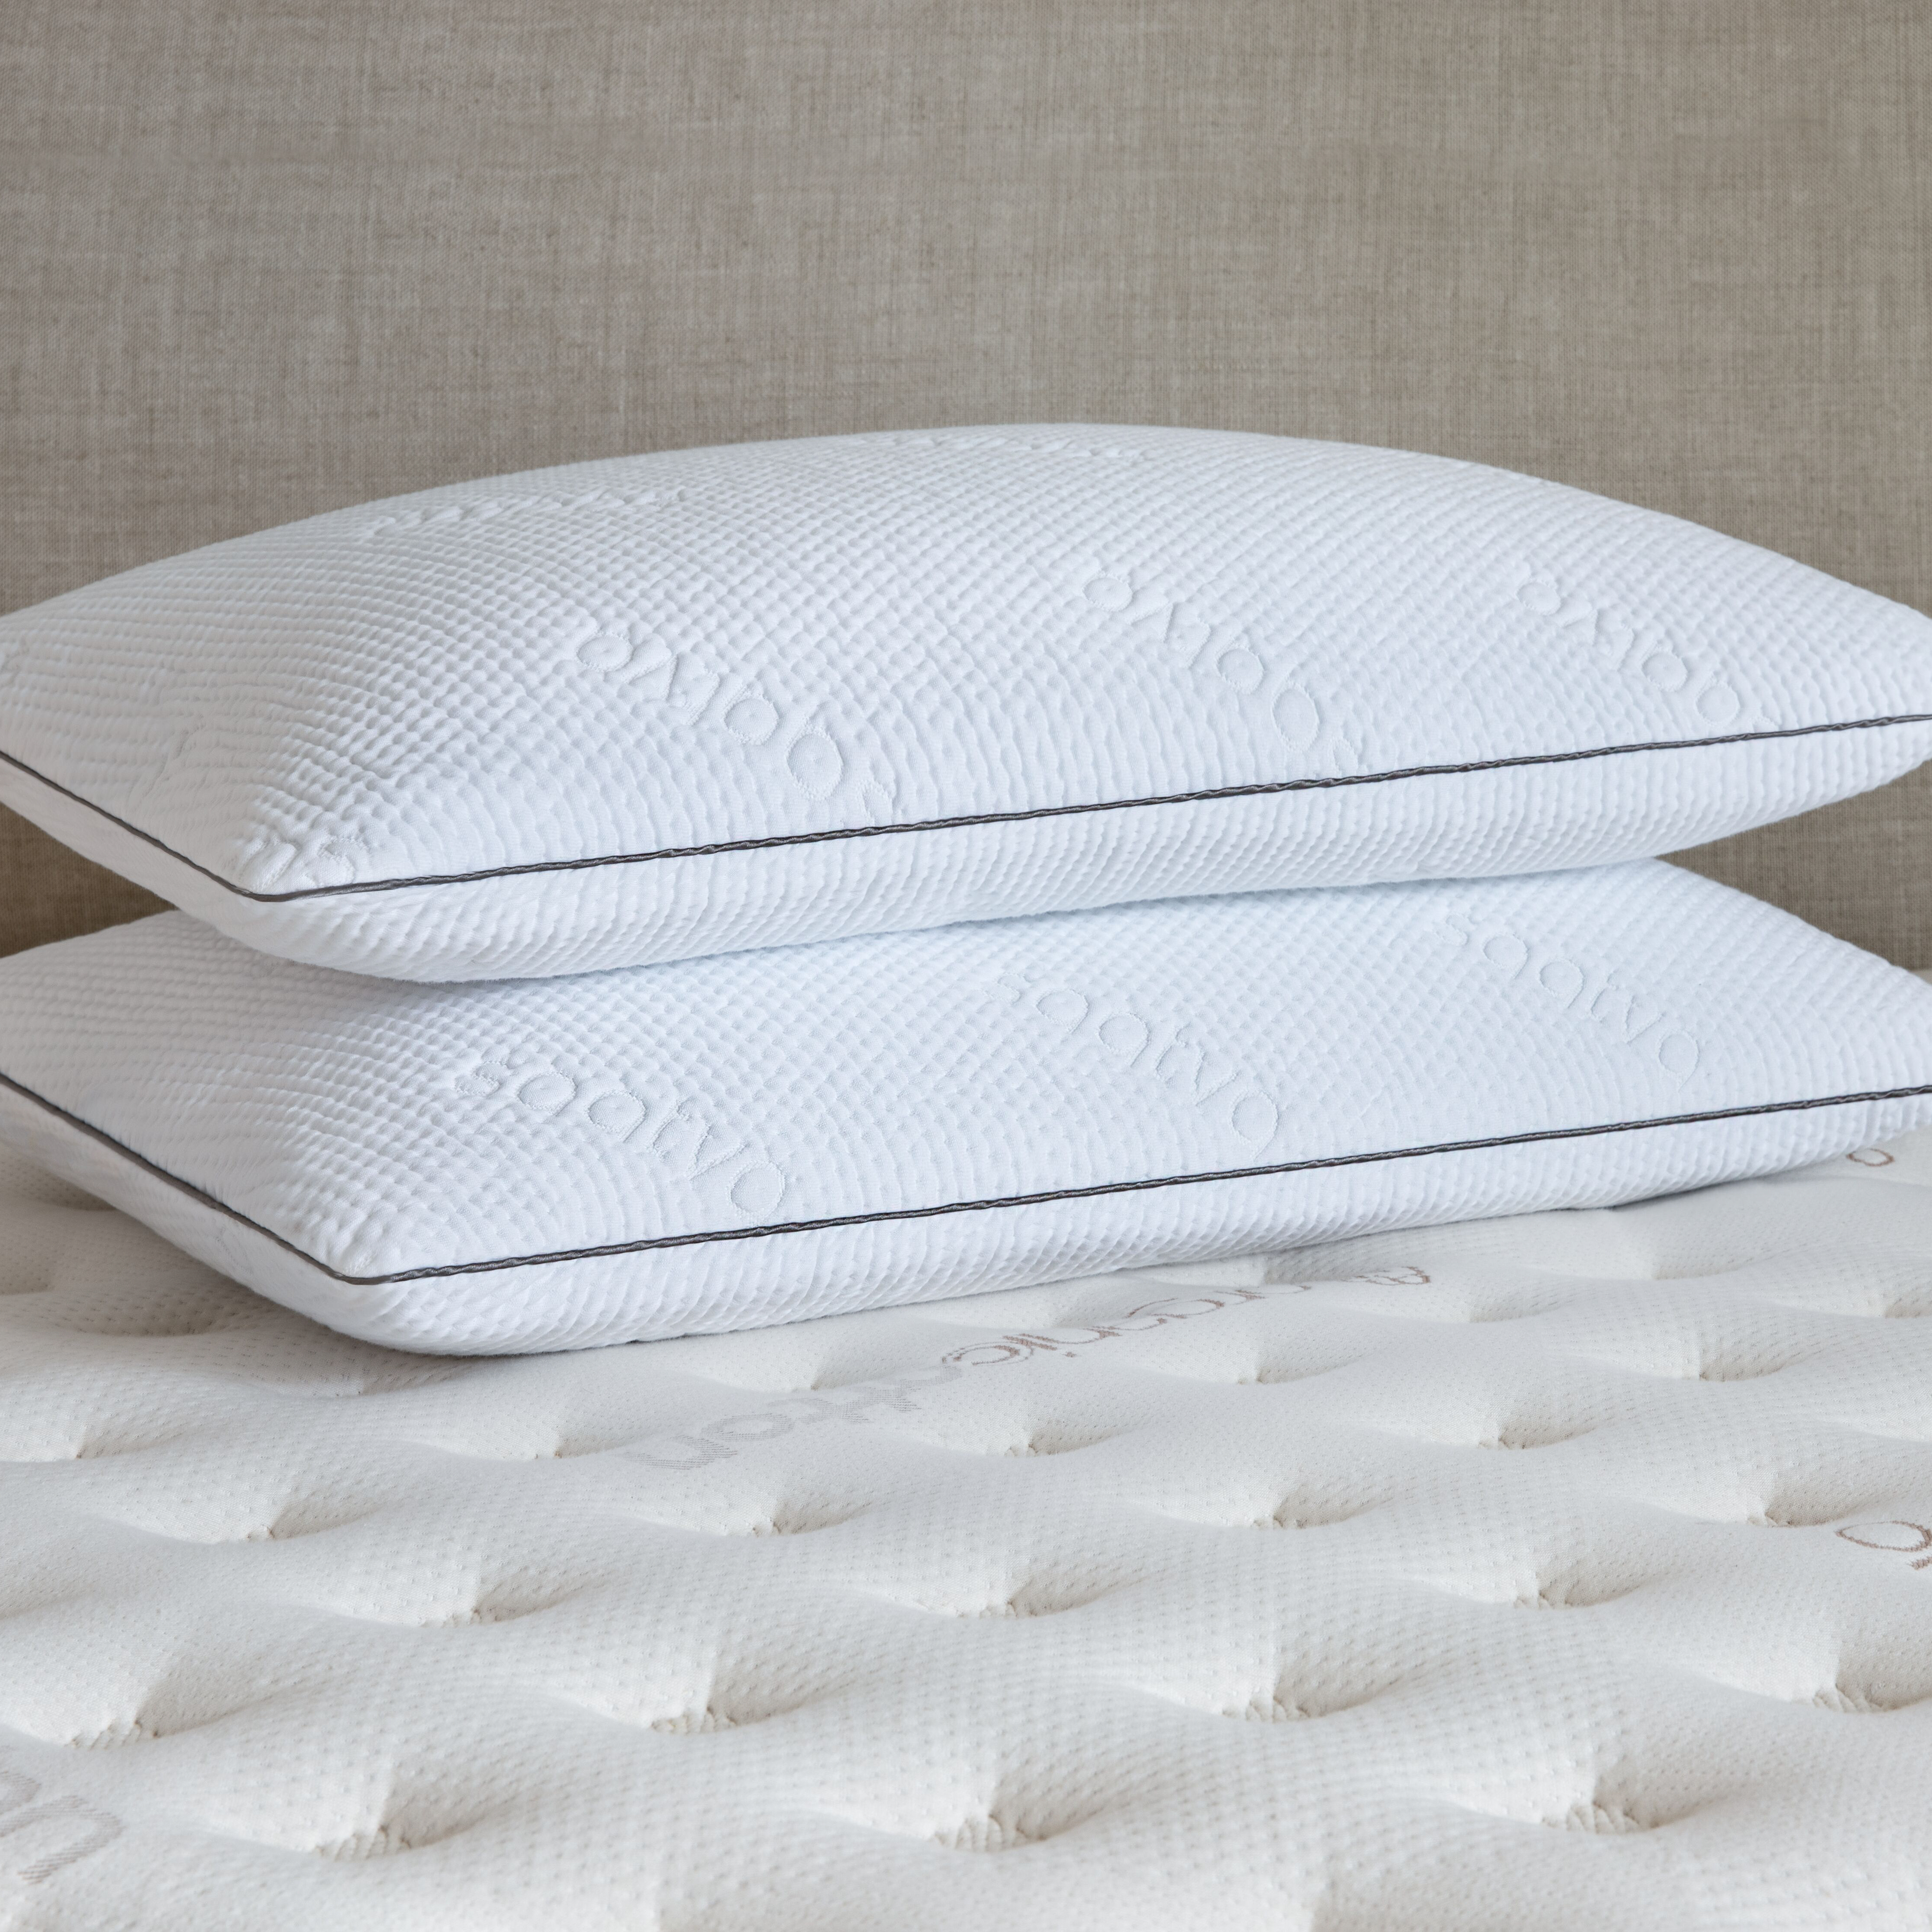 The Saatva Memory Foam Pillow - Queen - White - Graphite Infused Gel Foam - Cool And Comfortable Neck Support - Eco-Friendly